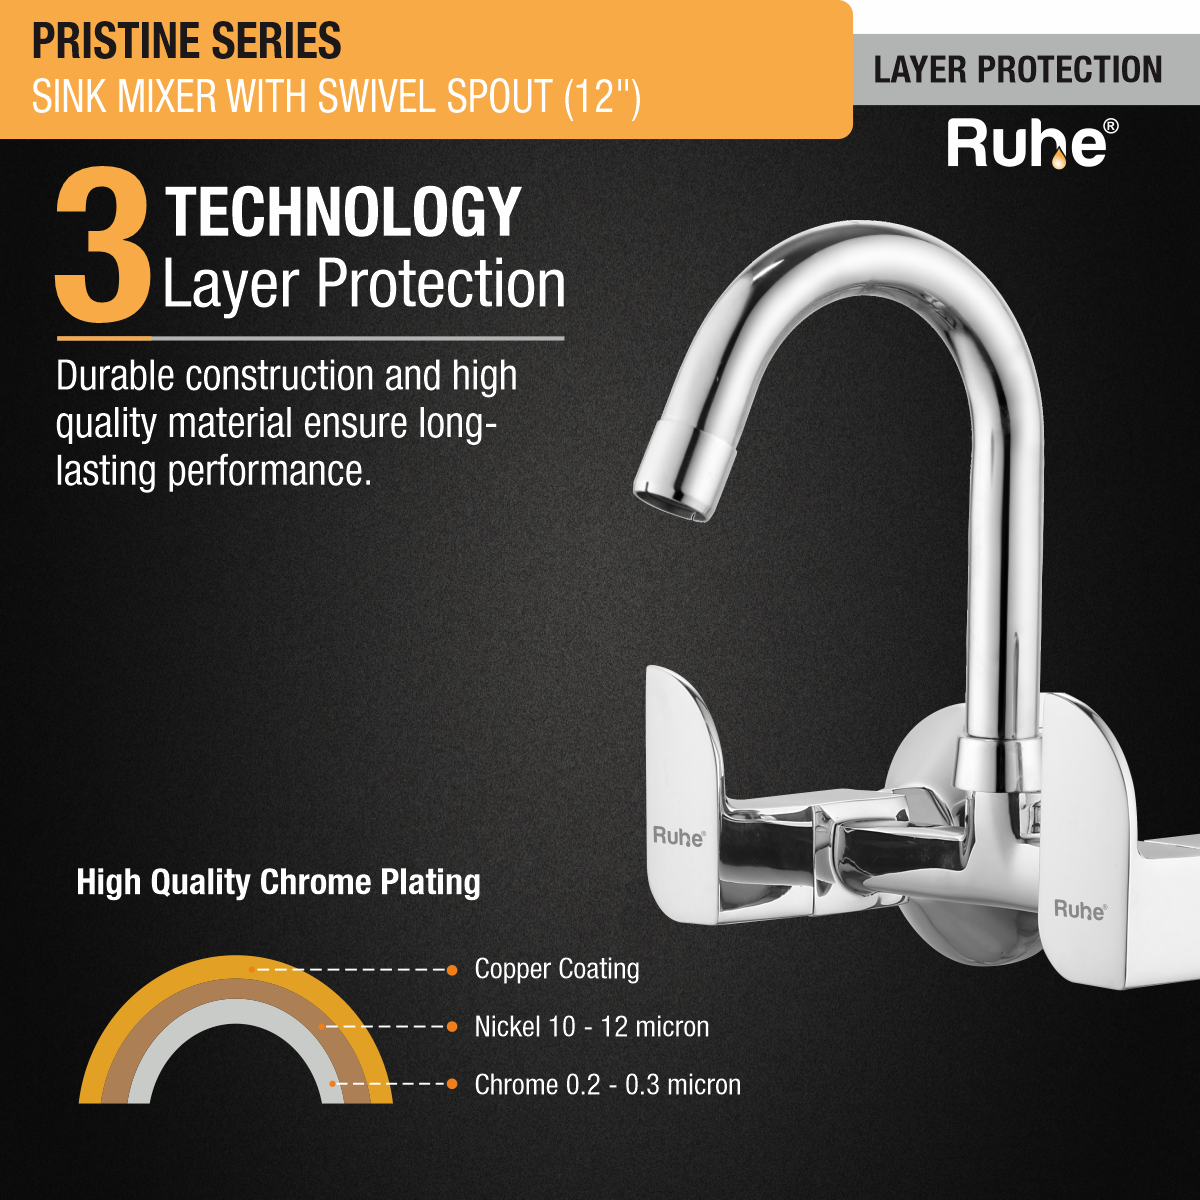 Pristine Sink Mixer with Small (12 inches) Round Swivel Spout Faucet 3 layer protection